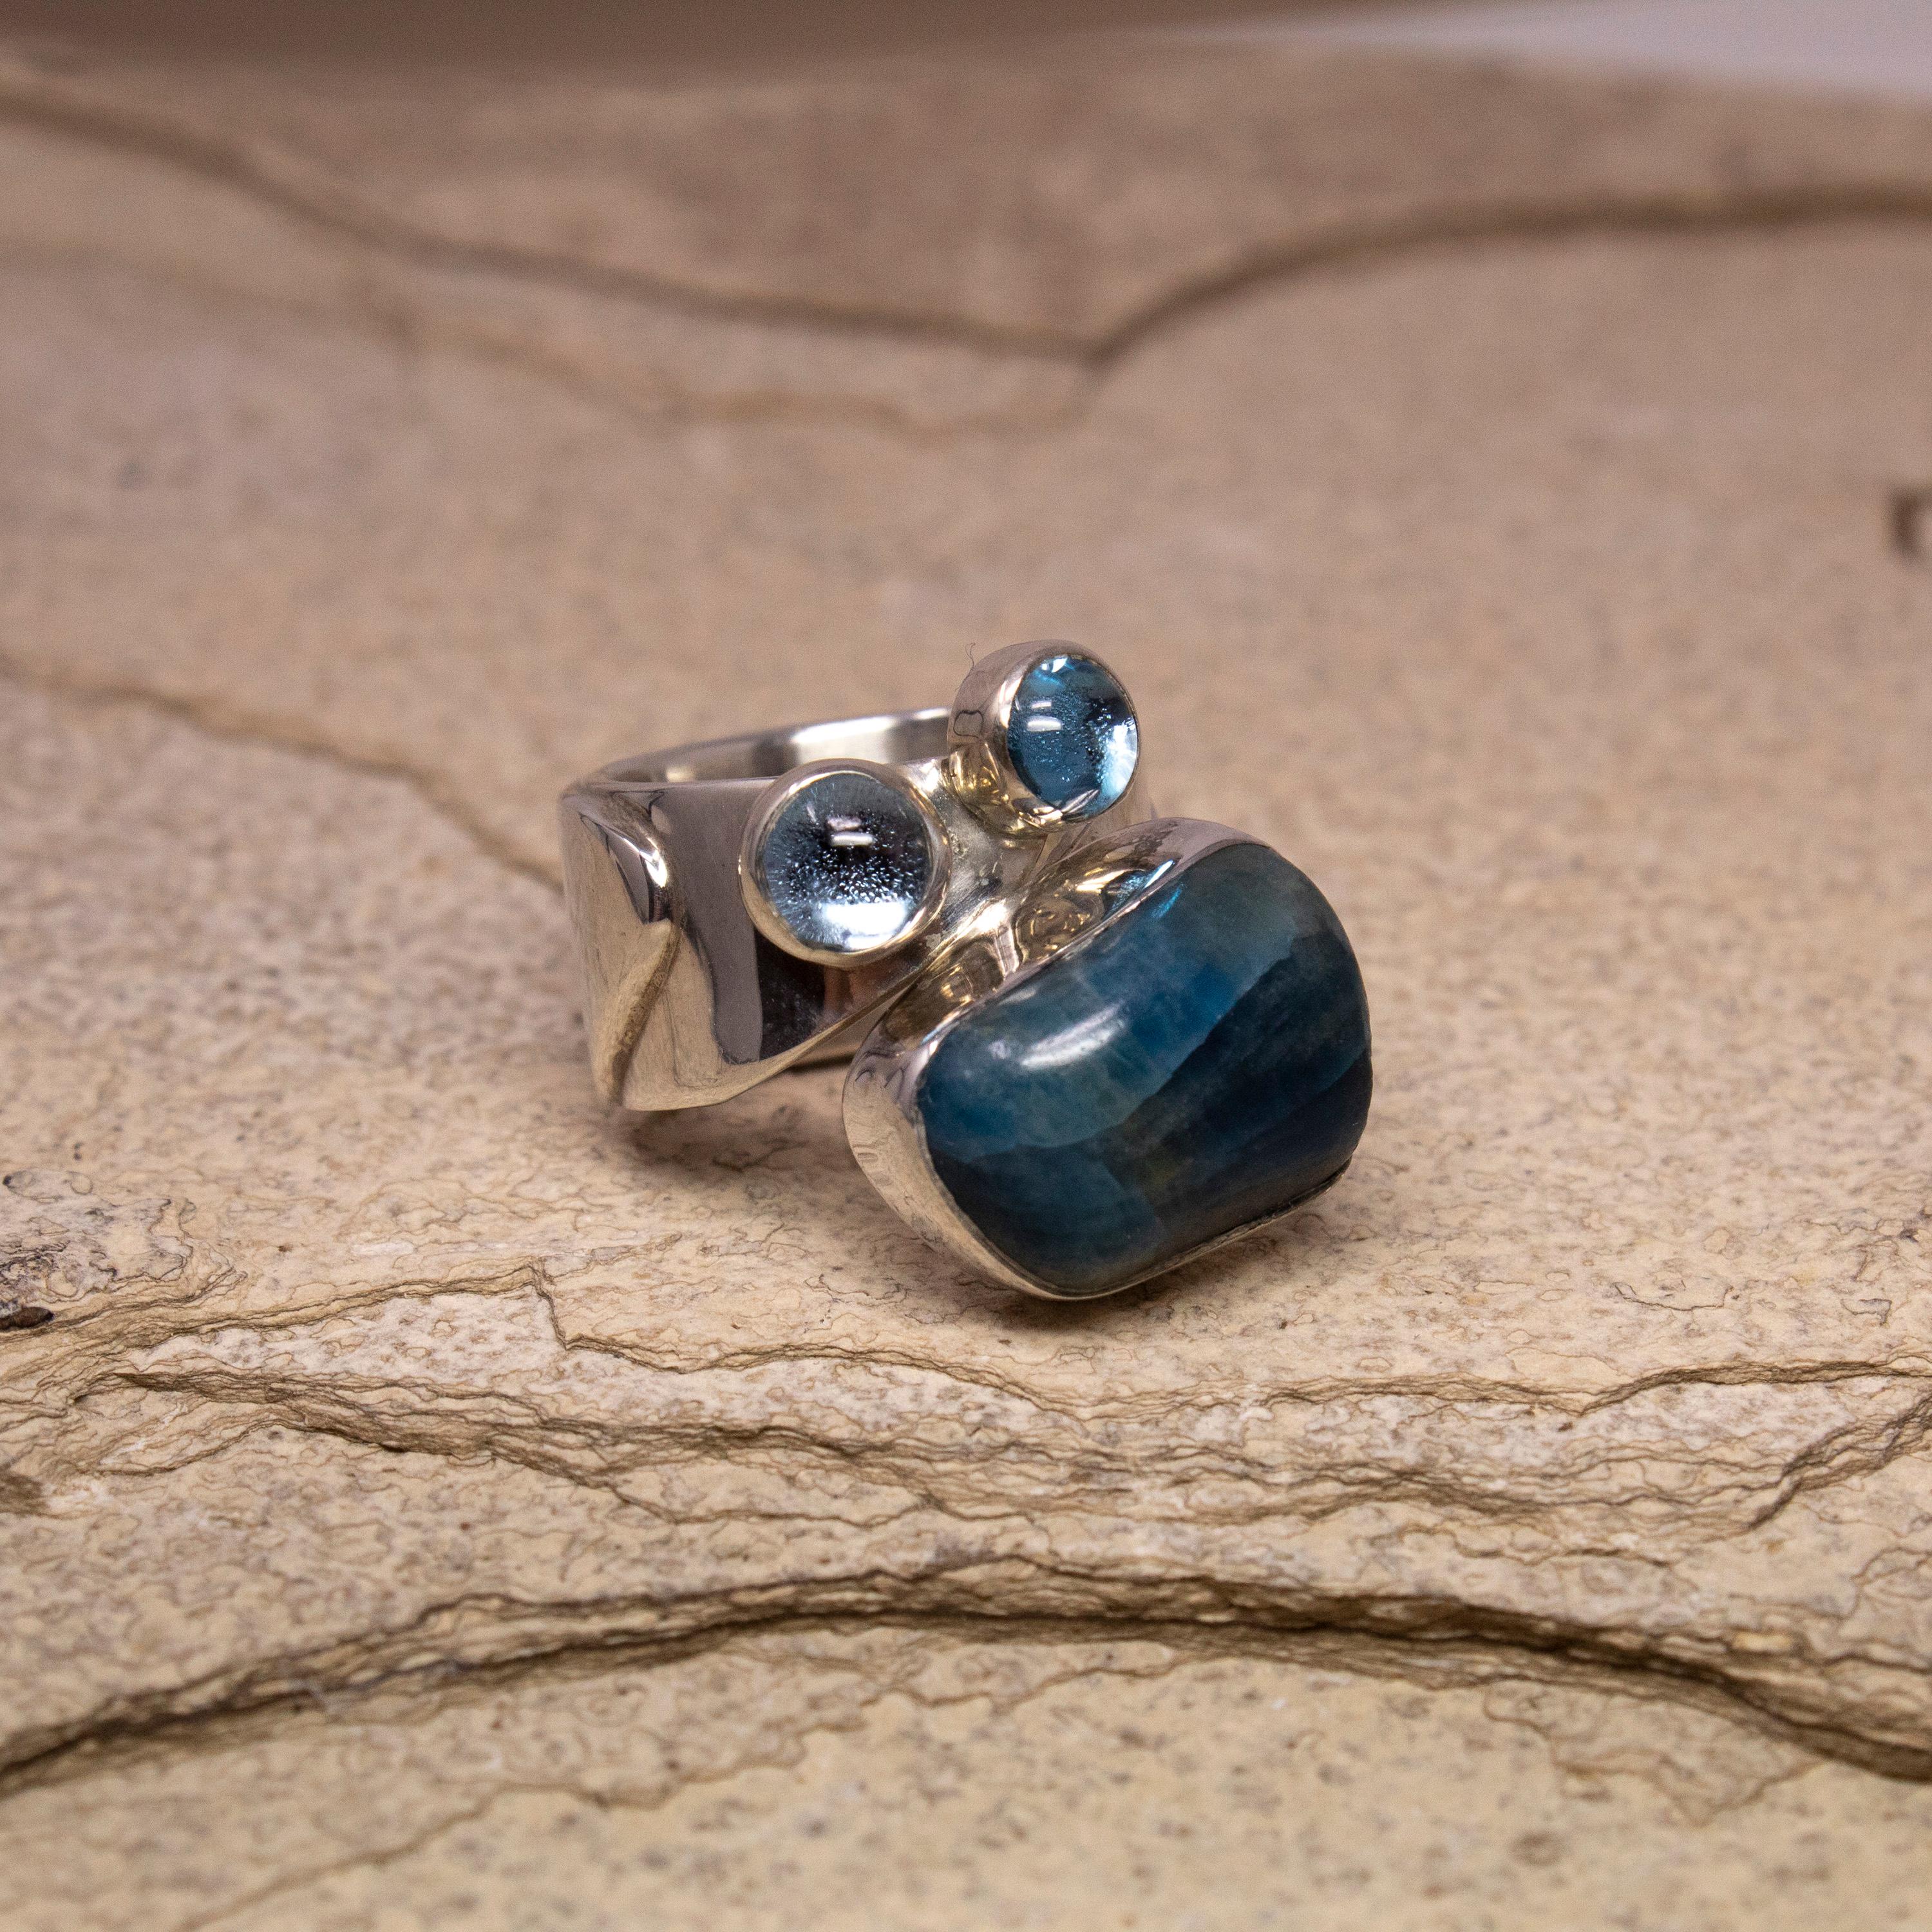 Lilly Barrack's rings have a distinct and instantly recognizable aesthetic. Handmade in New Mexico, these pieces incorporate brightly colored gems into the elegant (and unexpected) sterling silver lines.

-Rough Apatite
-Blue Topaz